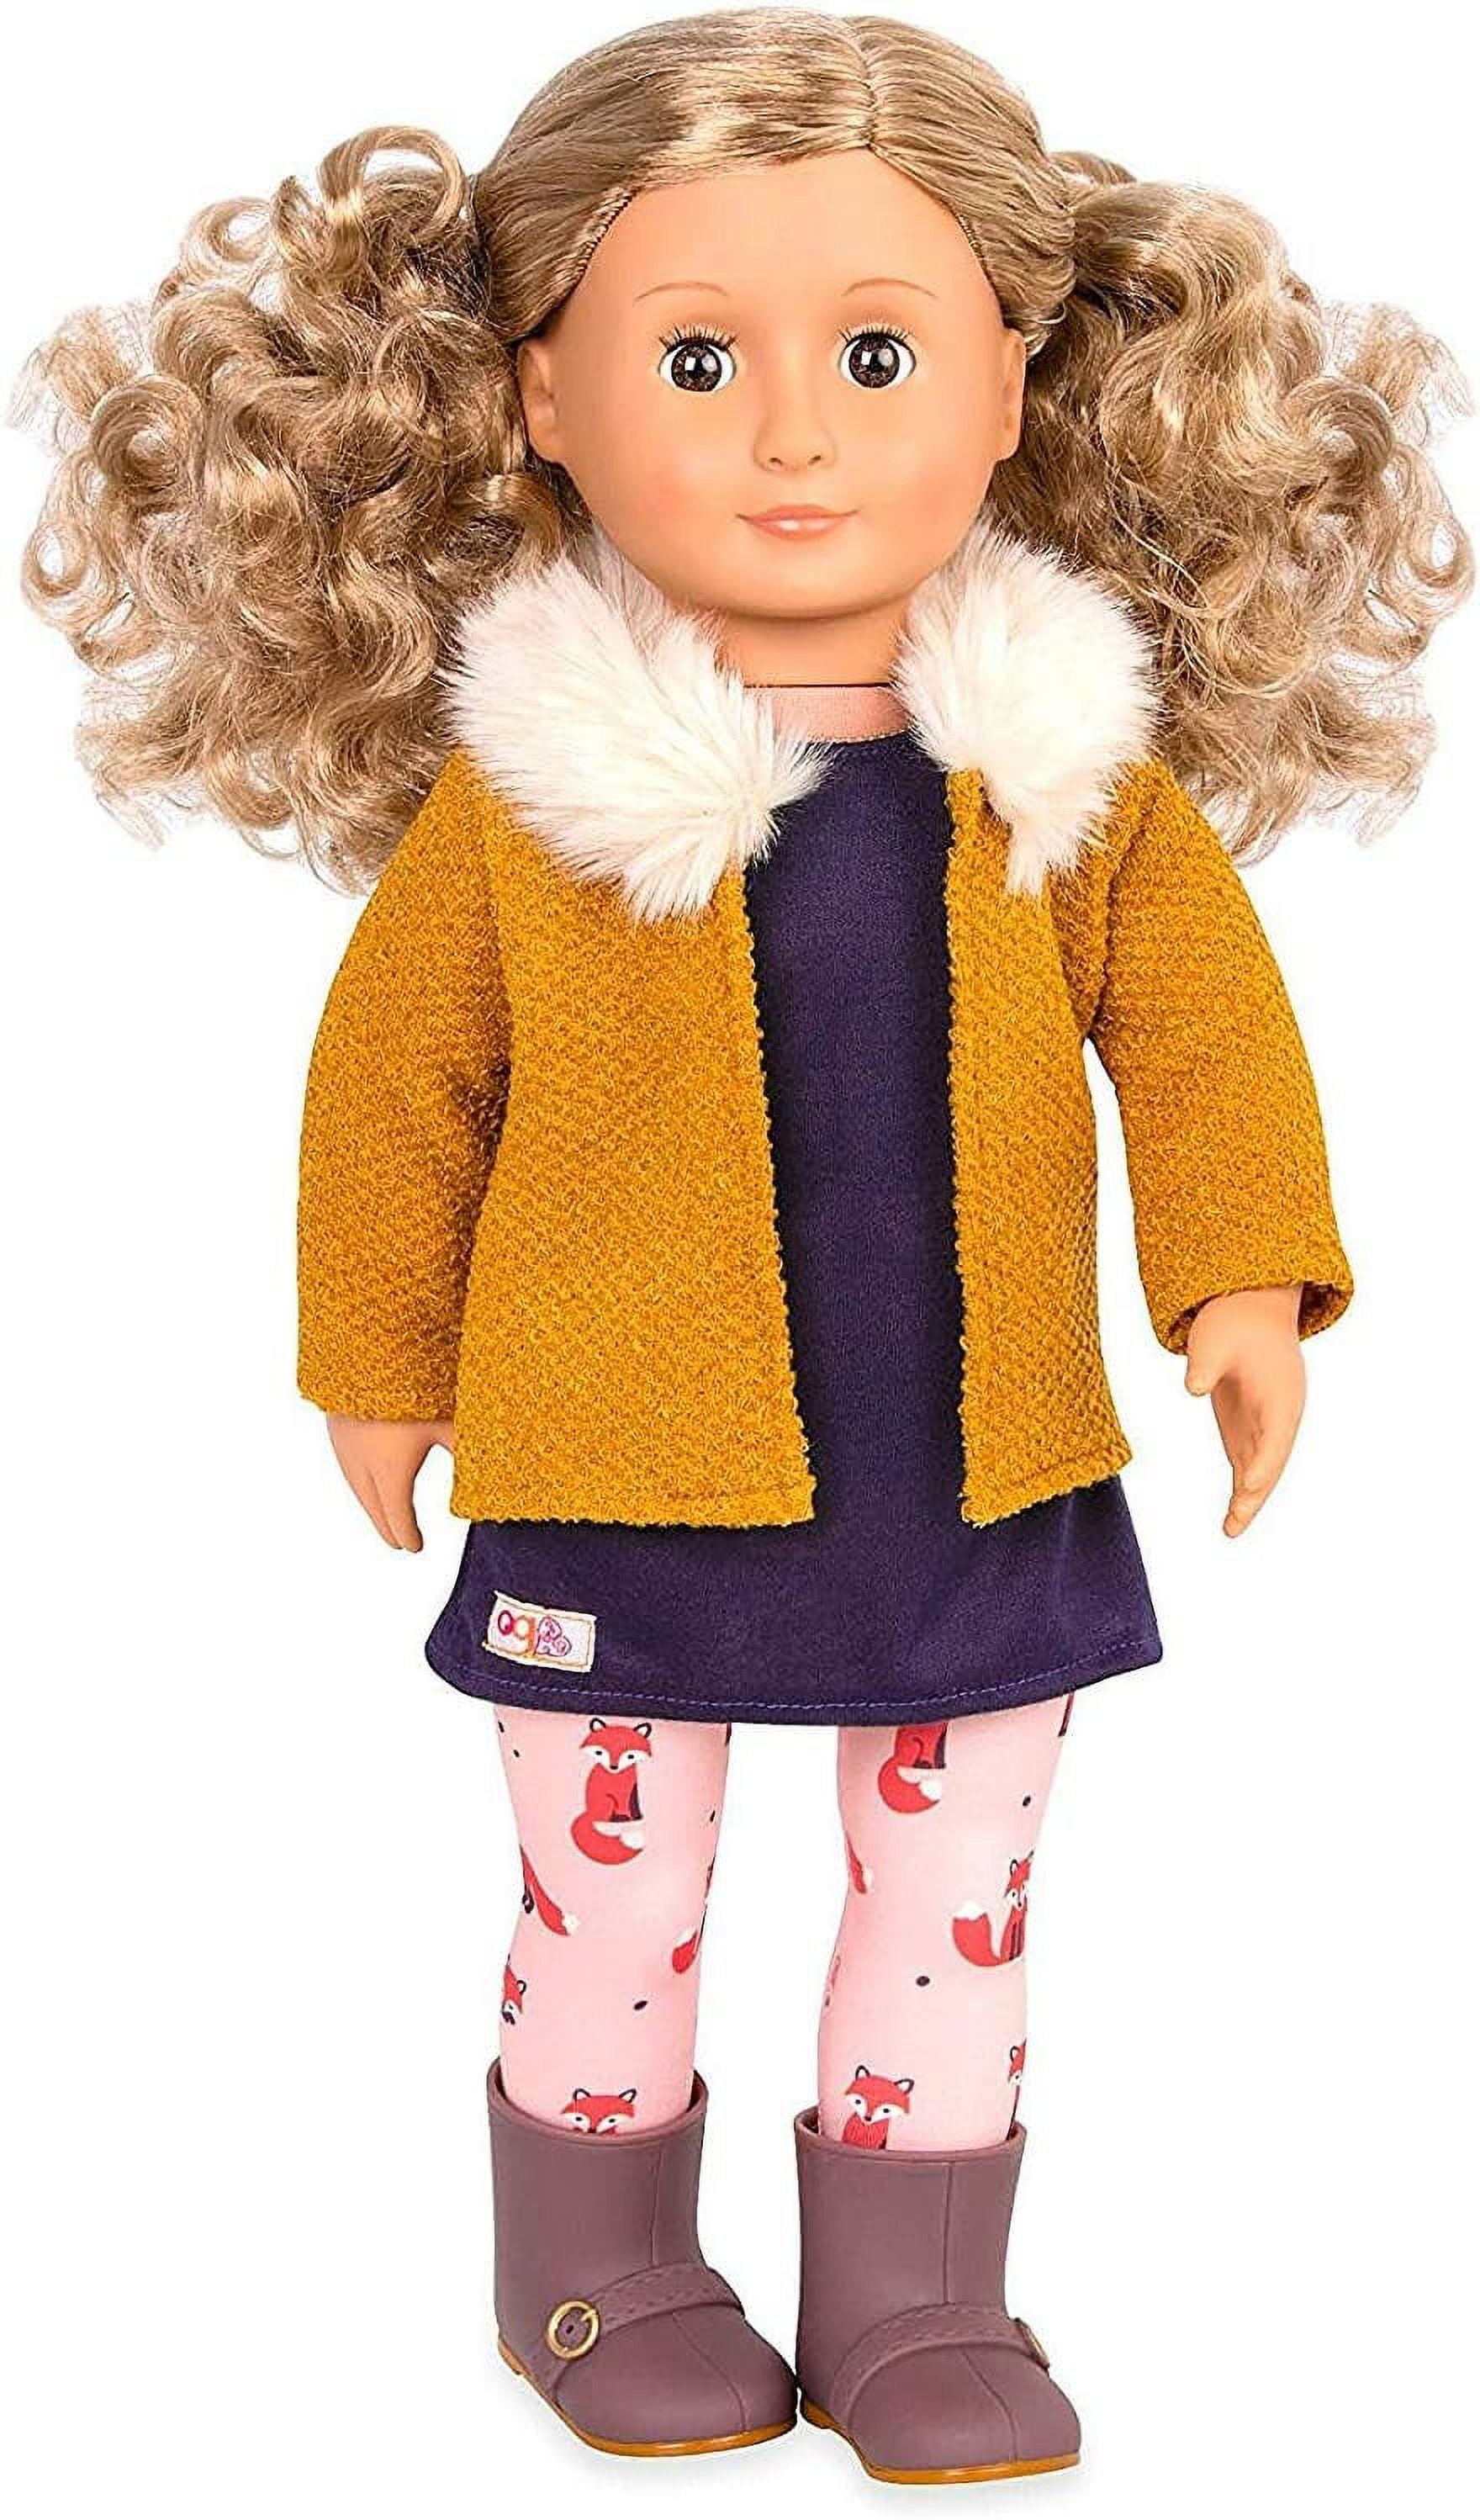 New Animal Pajamas For 18 Inch American Girl Doll 45cm Our